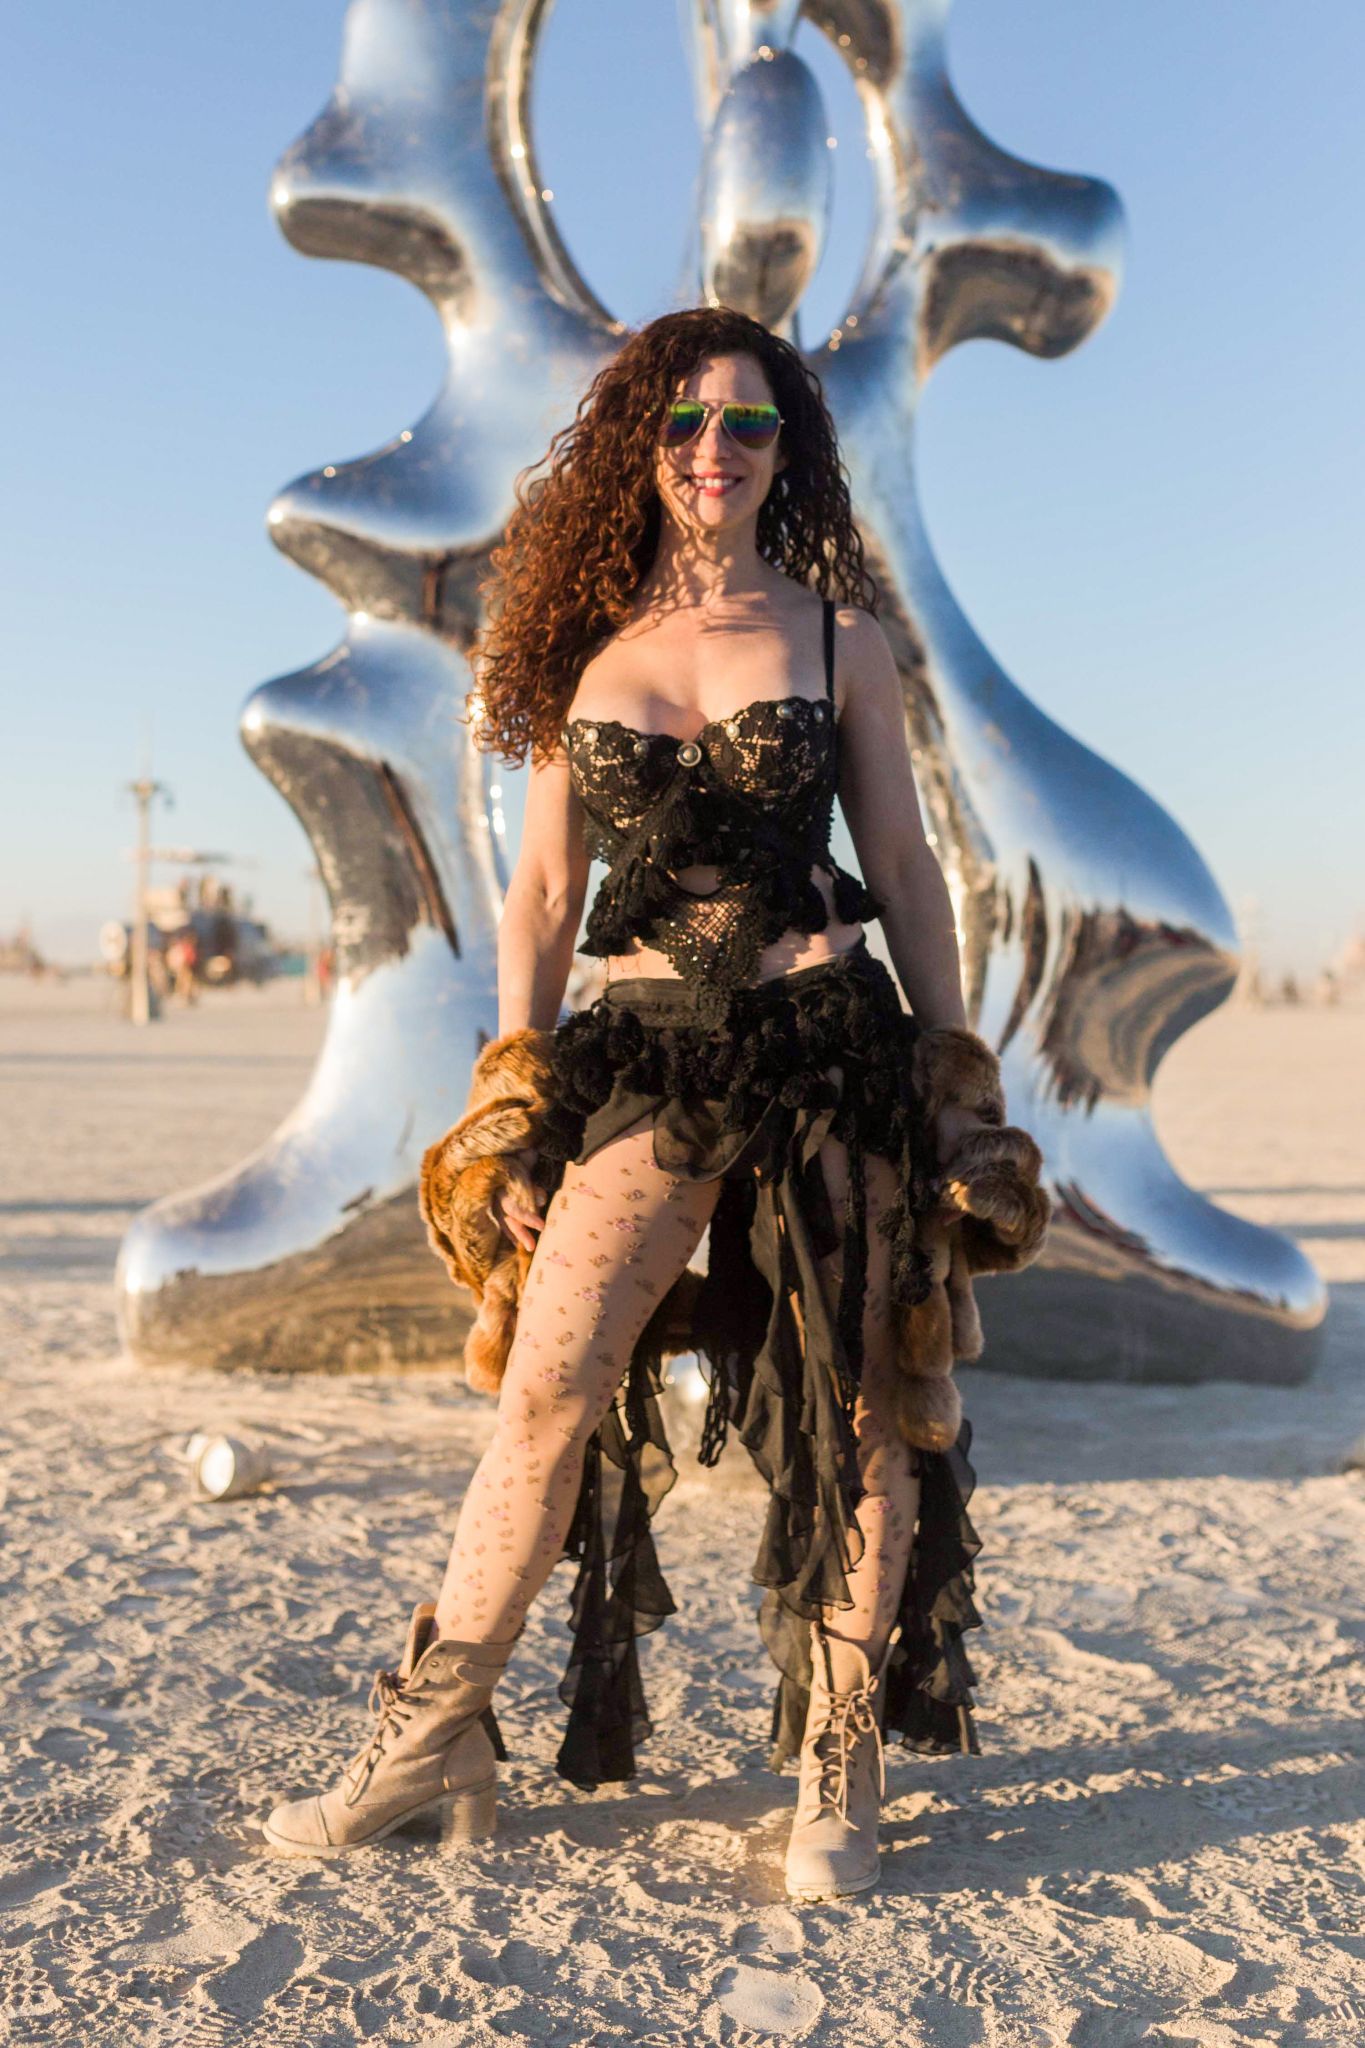 Burning Man 2019 outfits, fashion, hair: Looks on the playa